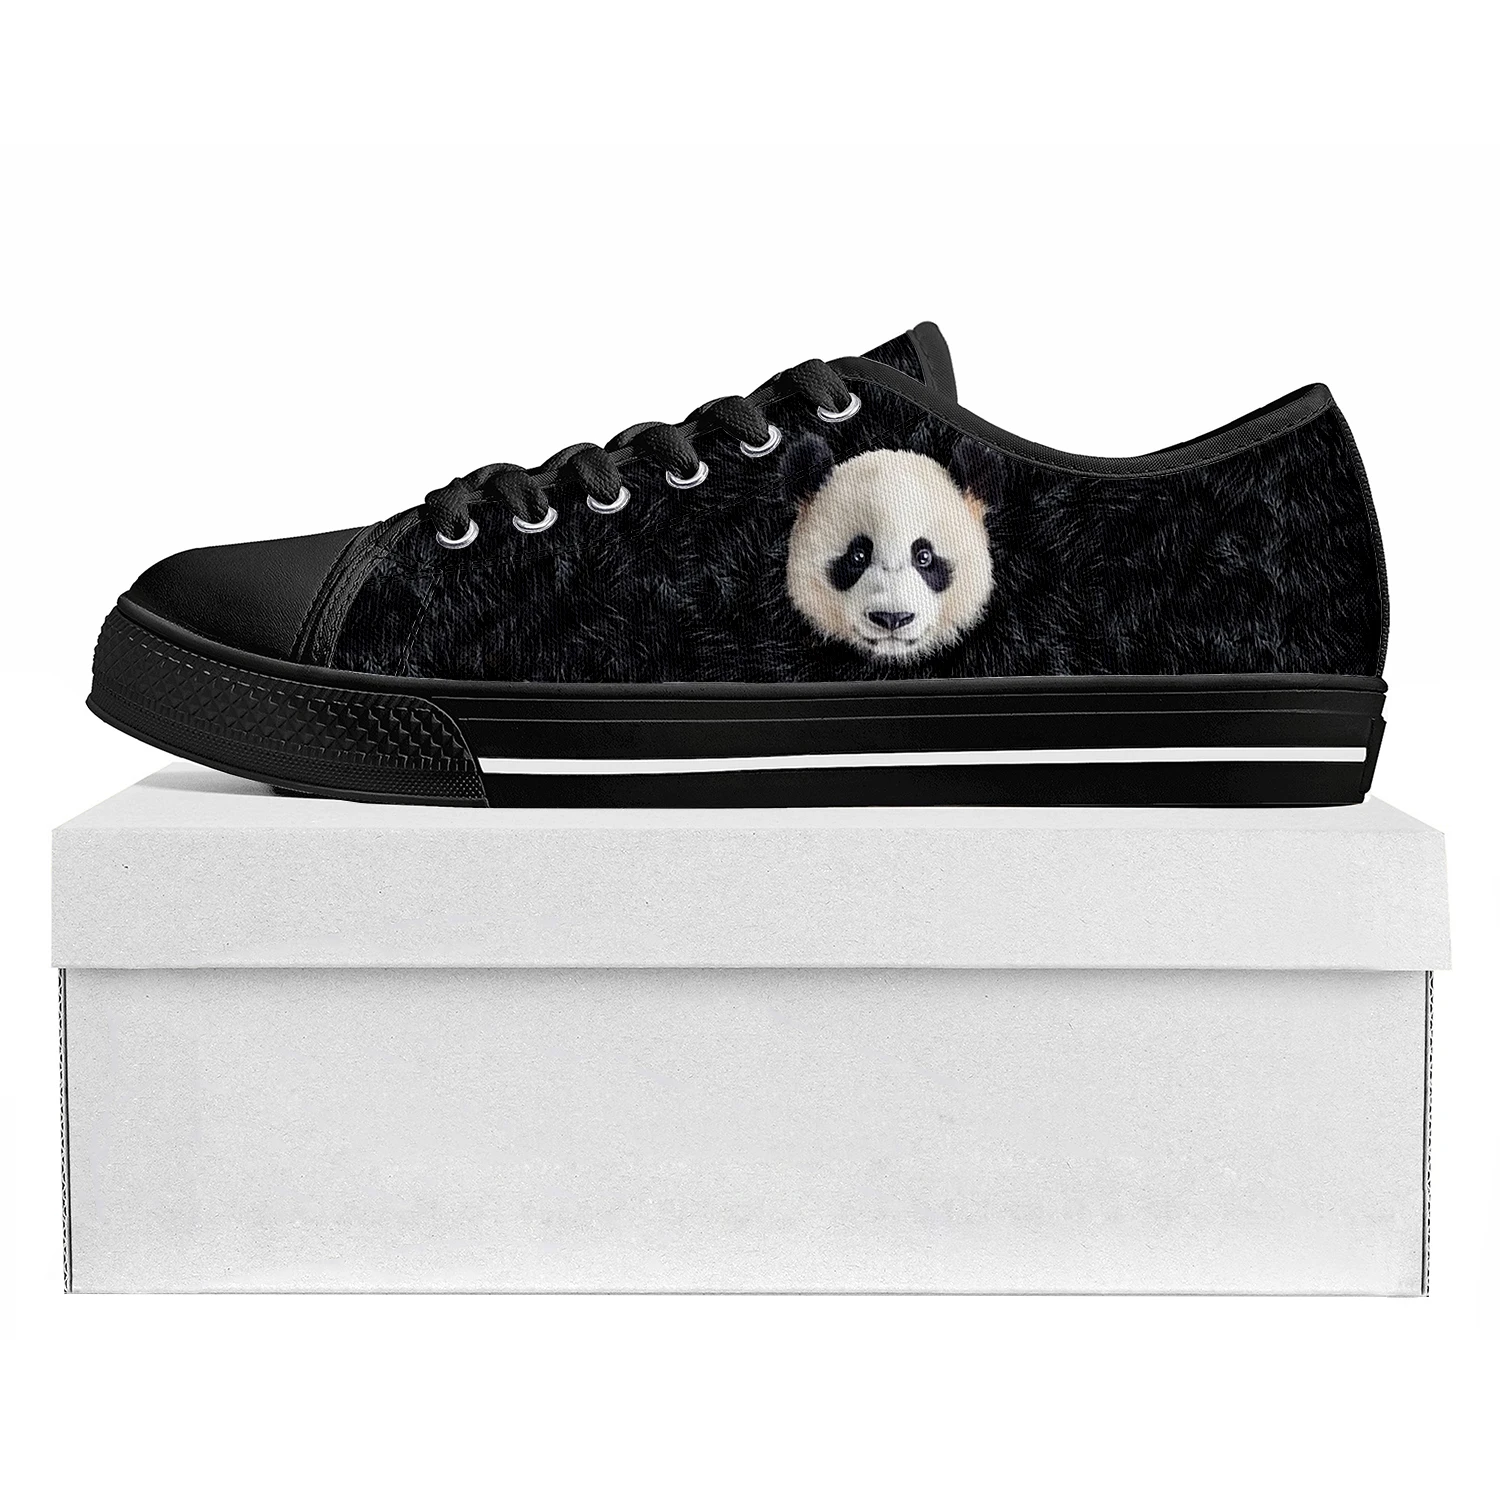 

Panda Leopard Tiger Wolf Dog Low Top High Quality Sneakers Mens Womens Teenager Tailor-made Shoe Canvas Sneaker Couple Shoes